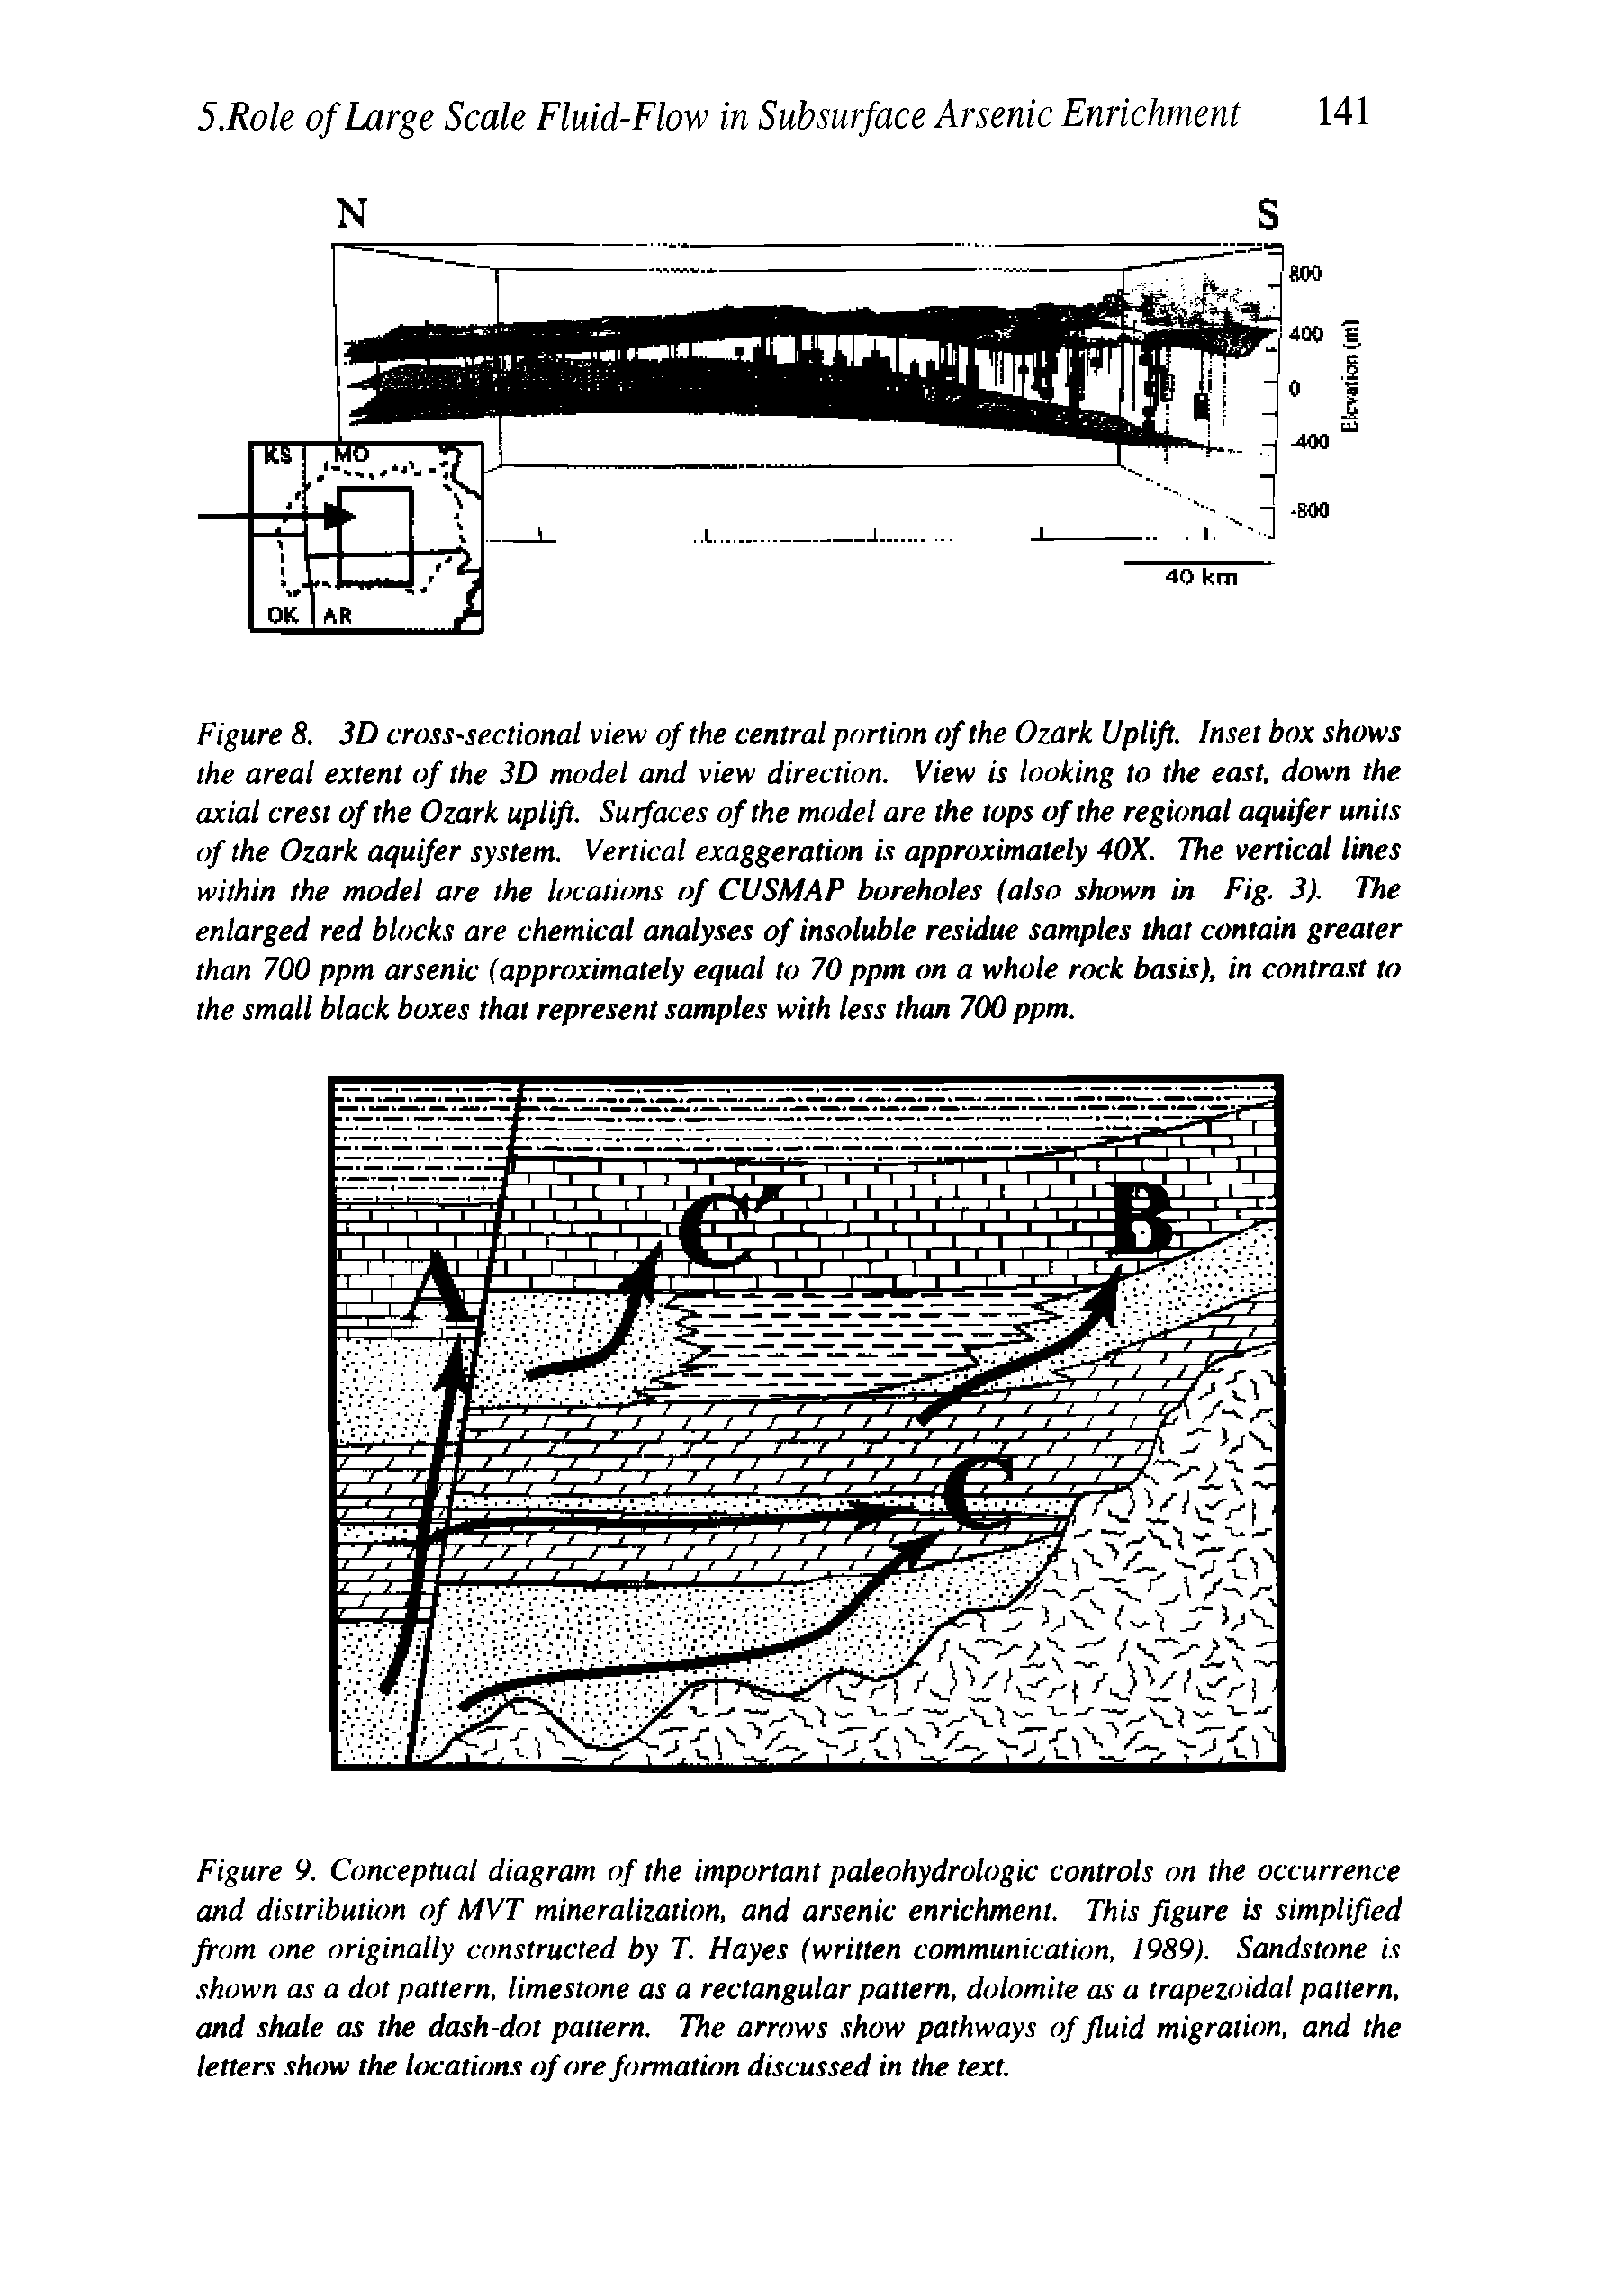 Figure 9. Conceptual diagram of the important paleohydrologic controls on the occurrence and distribution of MVT mineralization, and arsenic enrichment. This figure is simplified from one originally constructed by T. Hayes (written communication, 1989). Sandstone is. shown as a dot pattern, limestone as a rectangular pattern, dolomite as a trapezoidal pattern, and shale as the dash-dot pattern. The arrows show pathways of fluid migration, and the letters show the locations of ore formation discussed in the text.